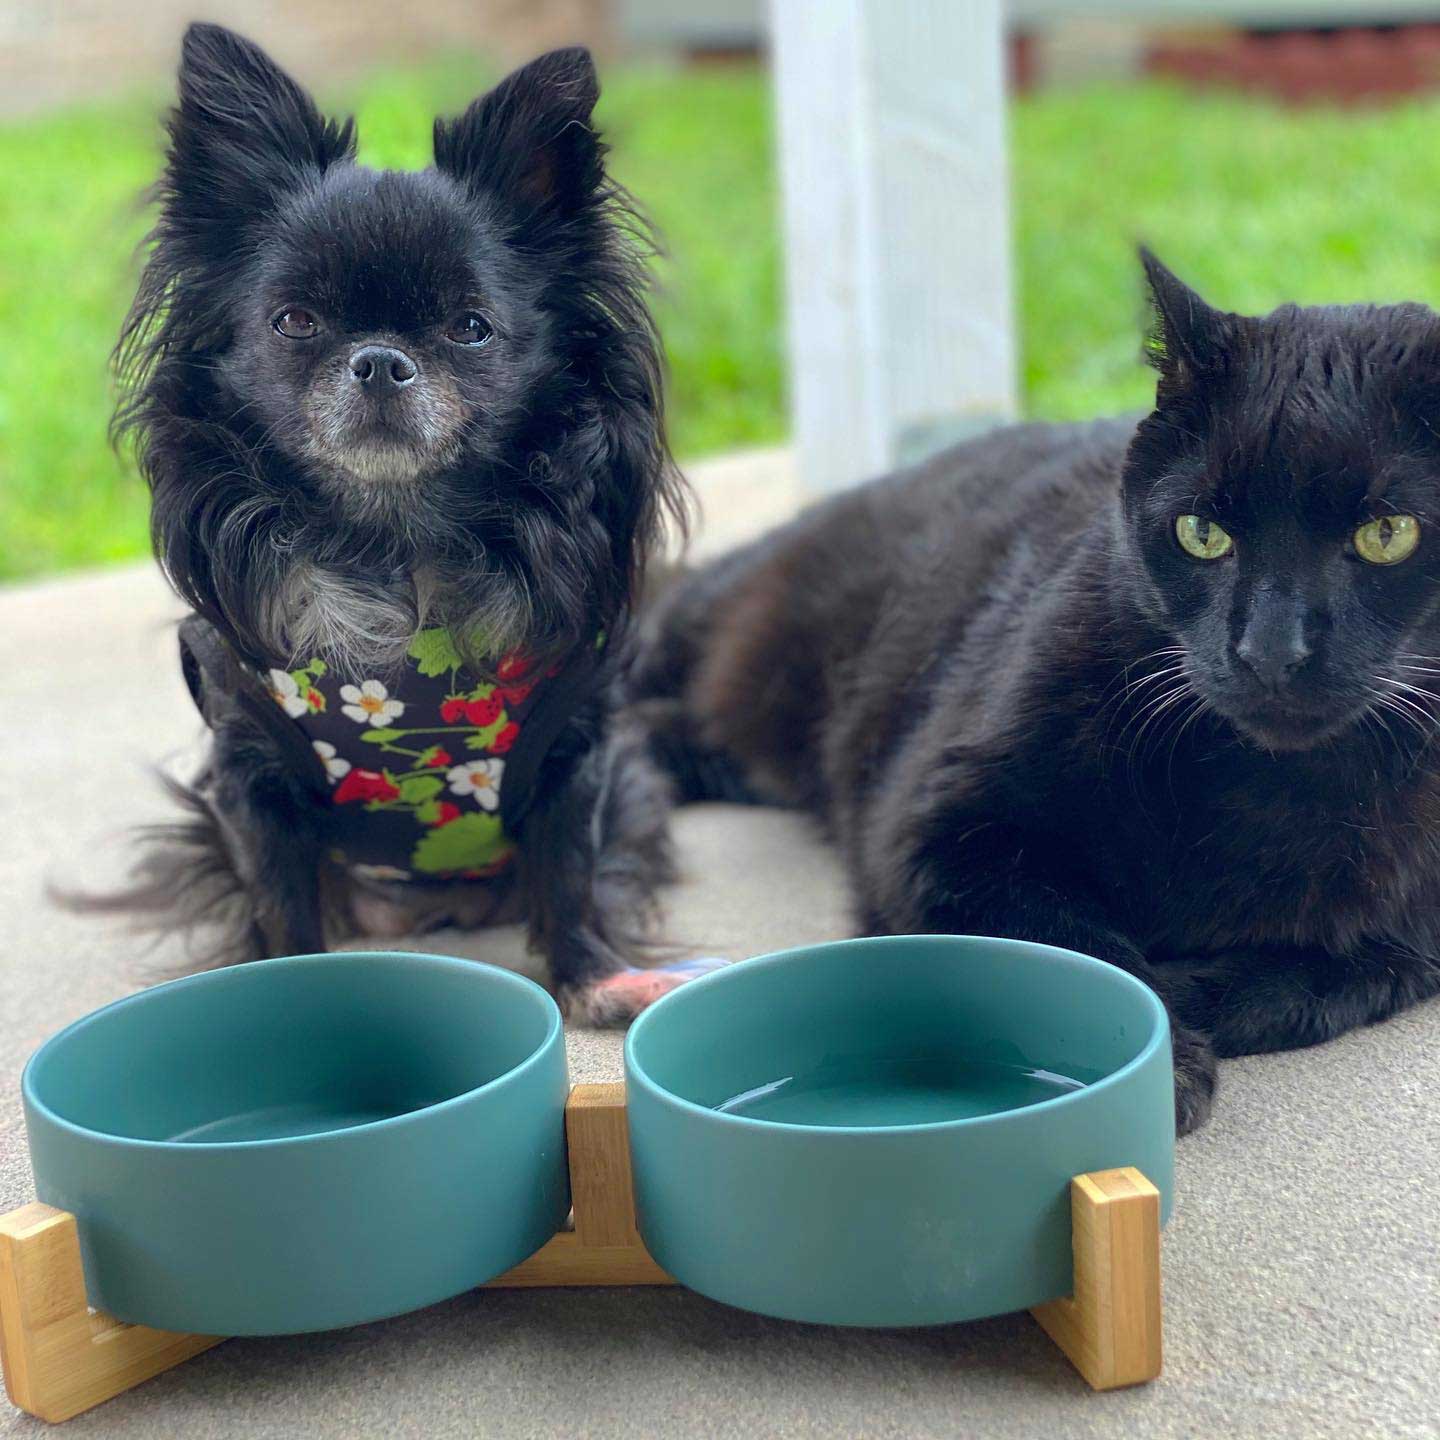 a green pet bowl set placed in front of the black dog and cat